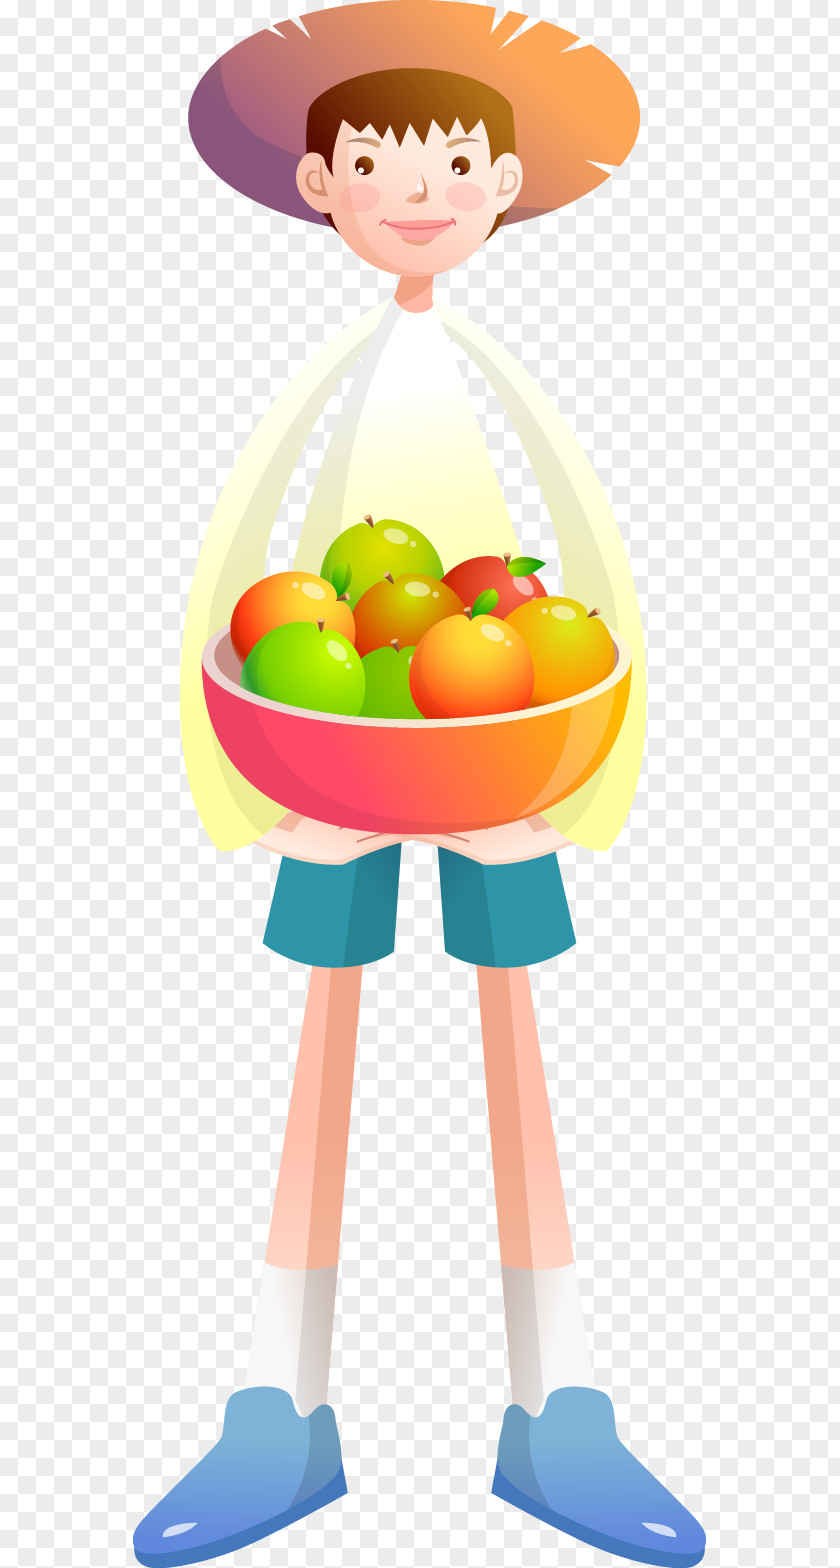 The Boy With Fruit Auglis Illustration PNG